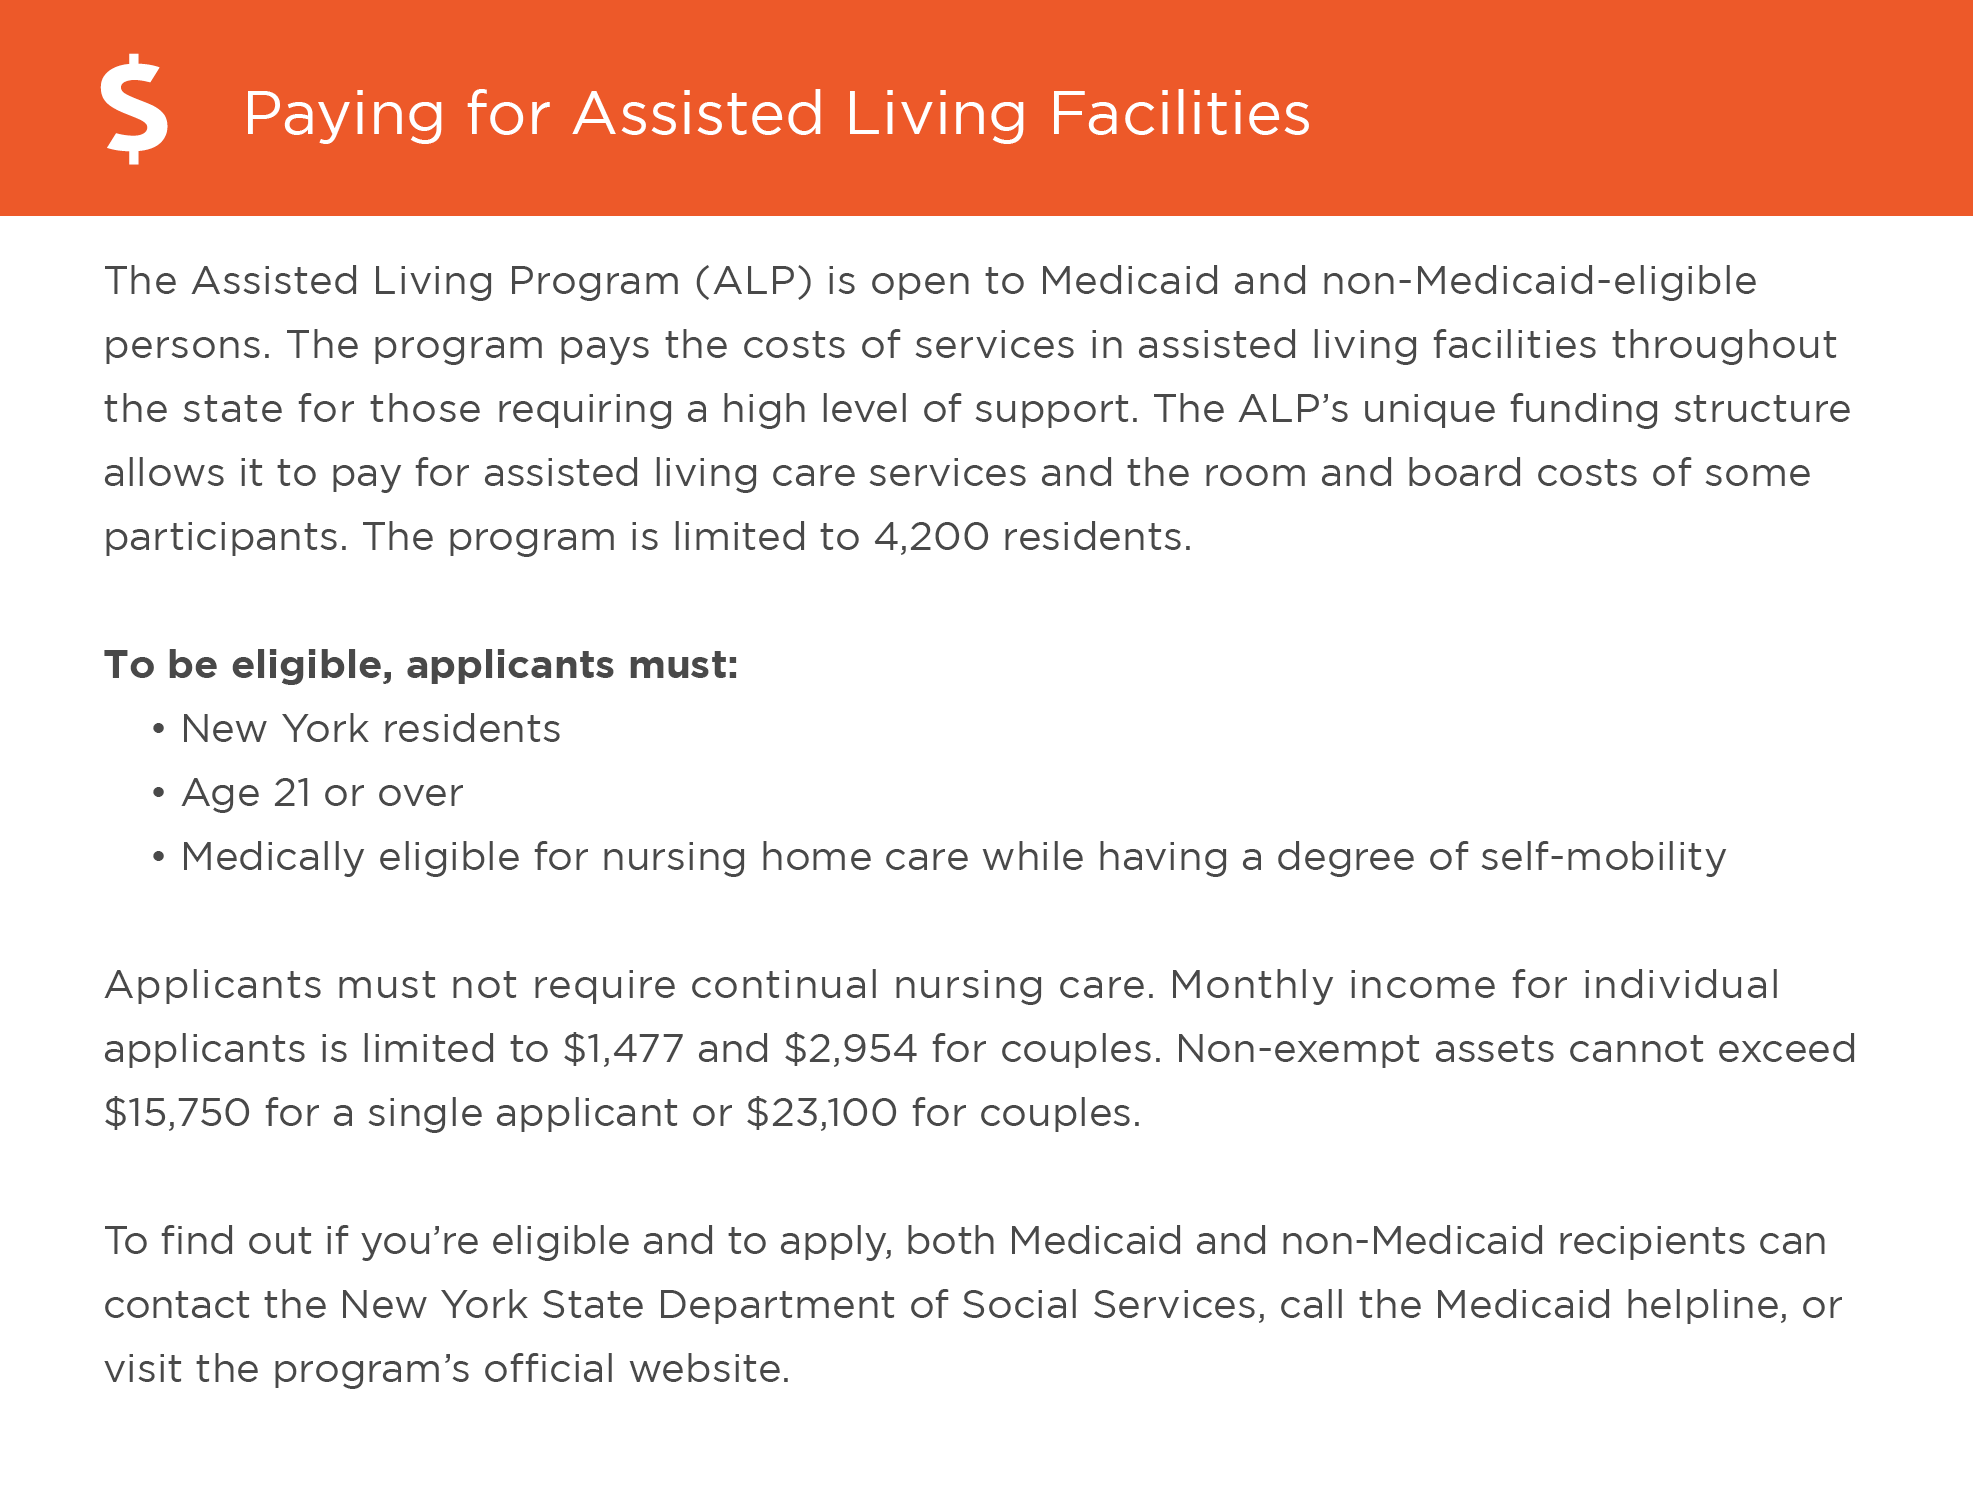 Paying for assisted living in New York graphic